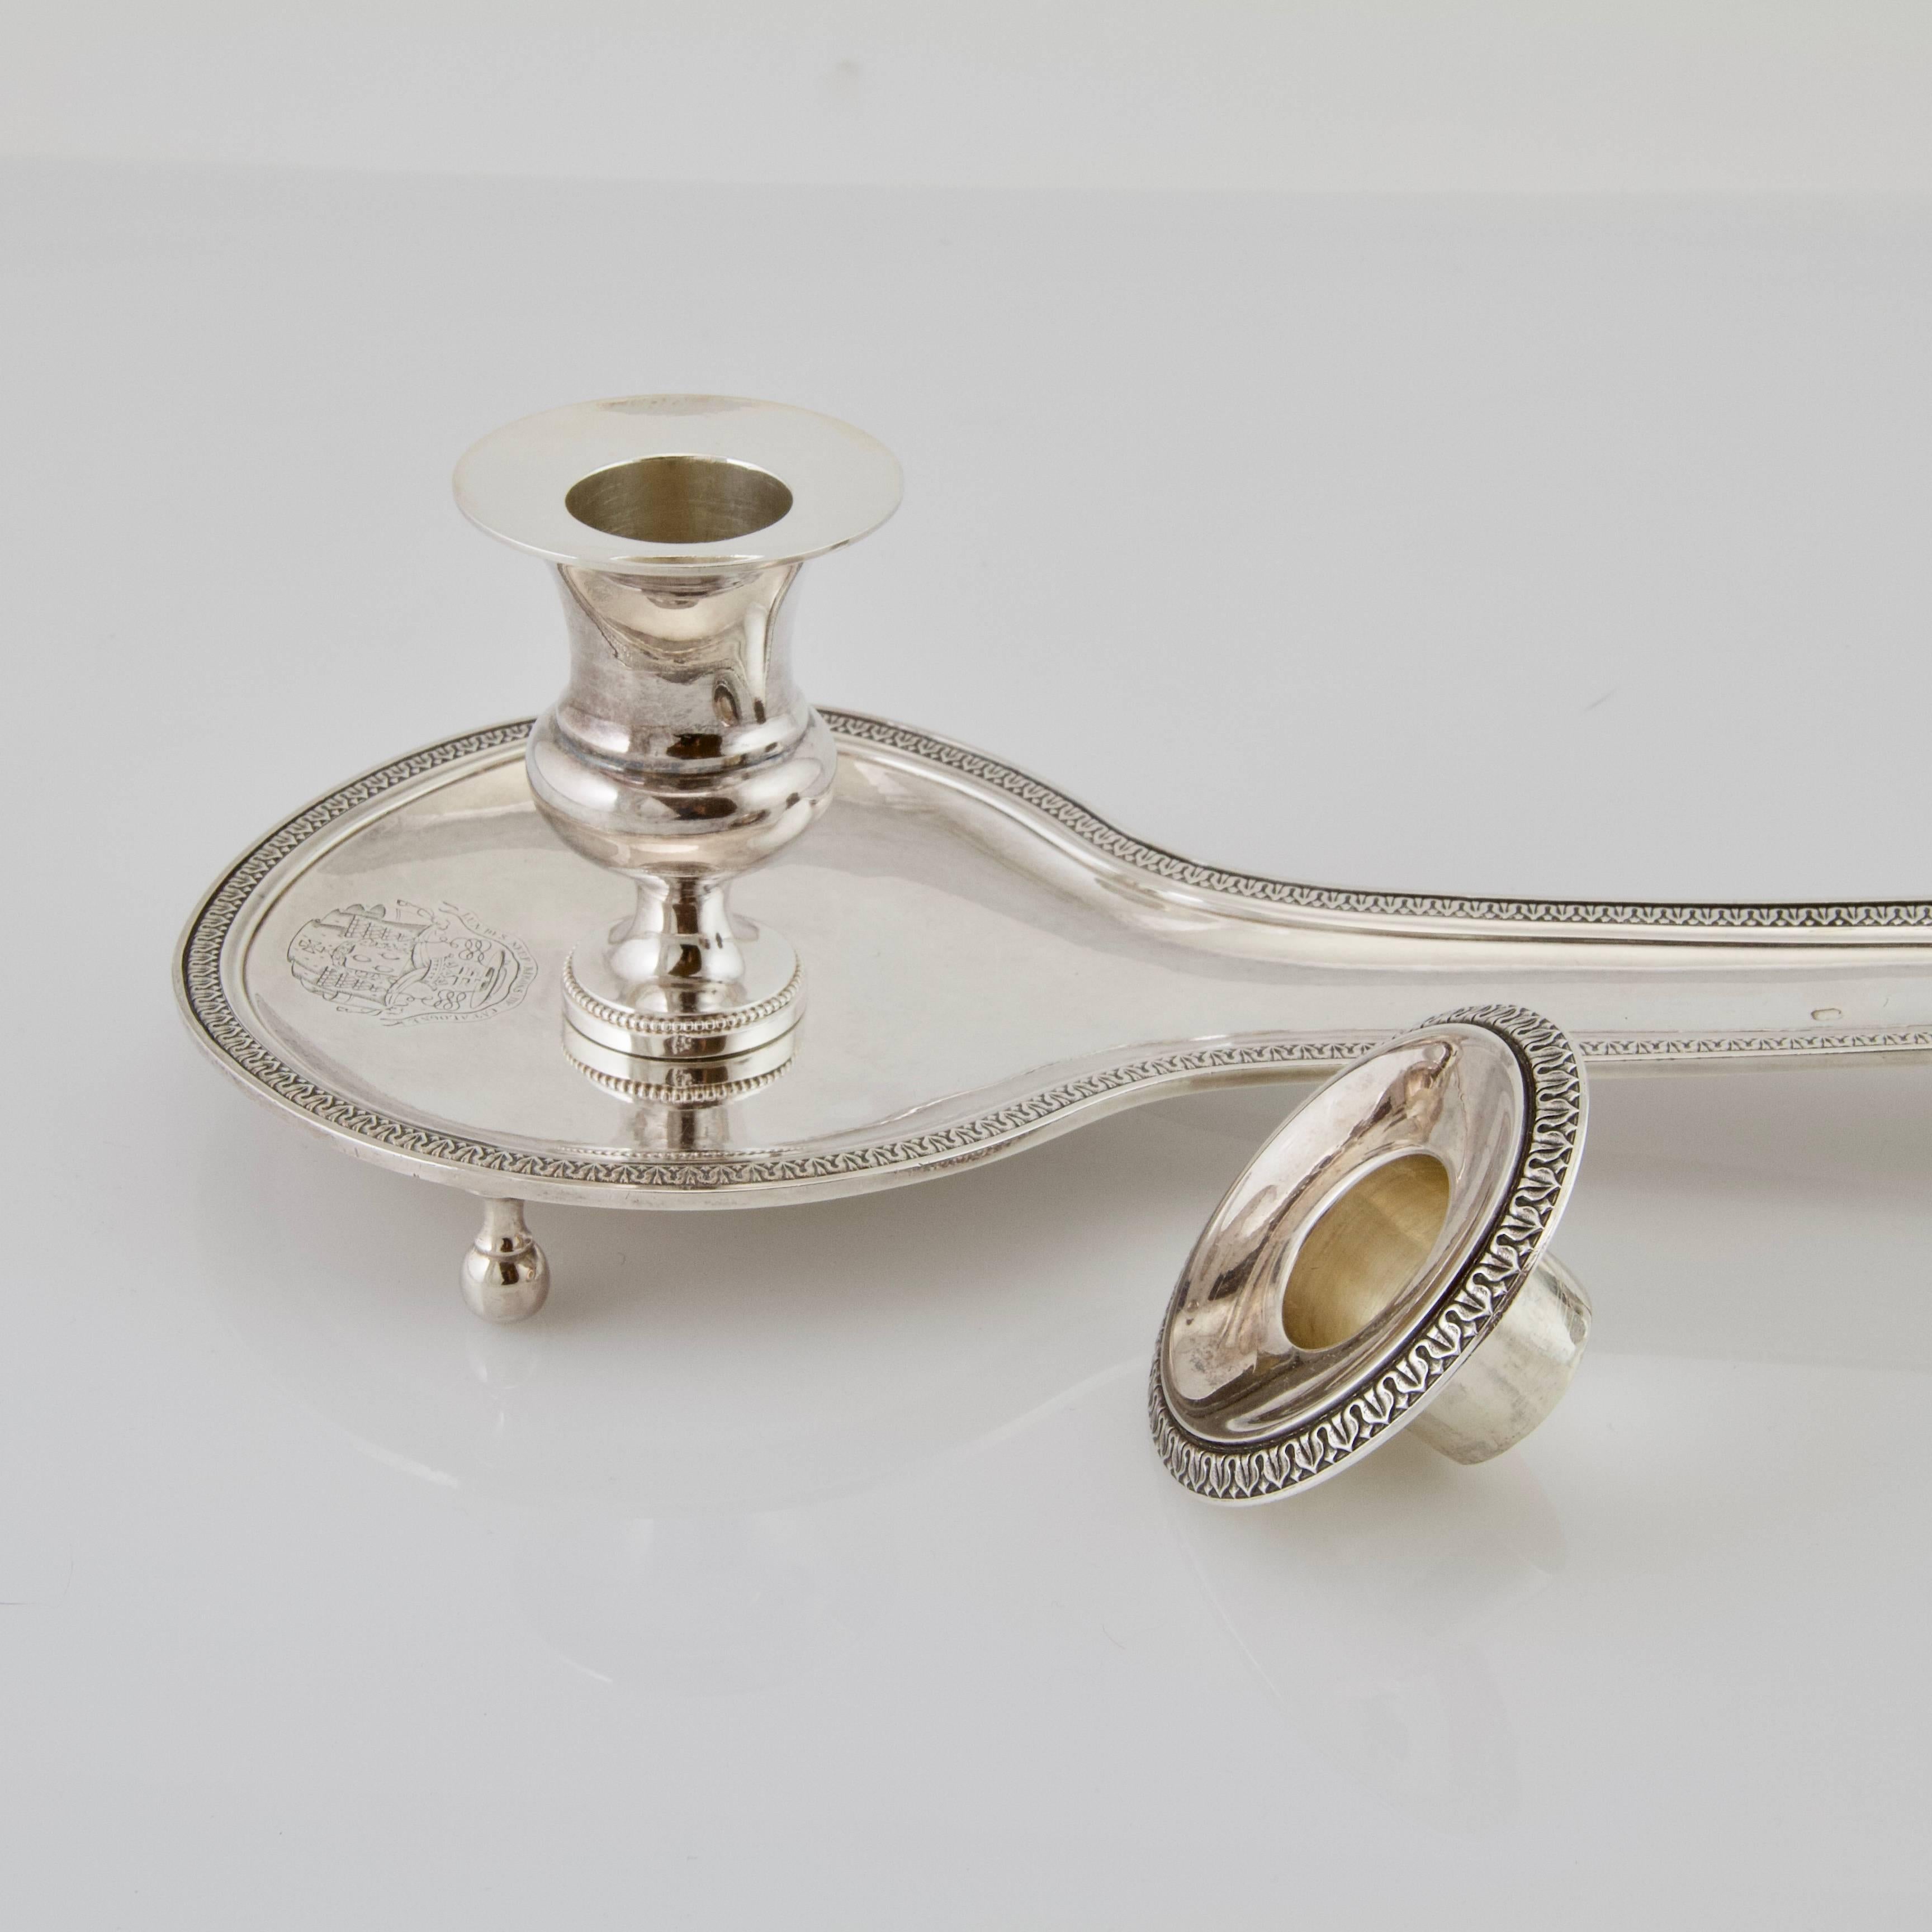 Very unusual and rare bishop candlestick. 
Shaped as a chamberstick with a long handle for a candle supply. Prayer's time lasted longer than burning time of a candle. The supply, containing the second candle, allowing to replace easily the candle